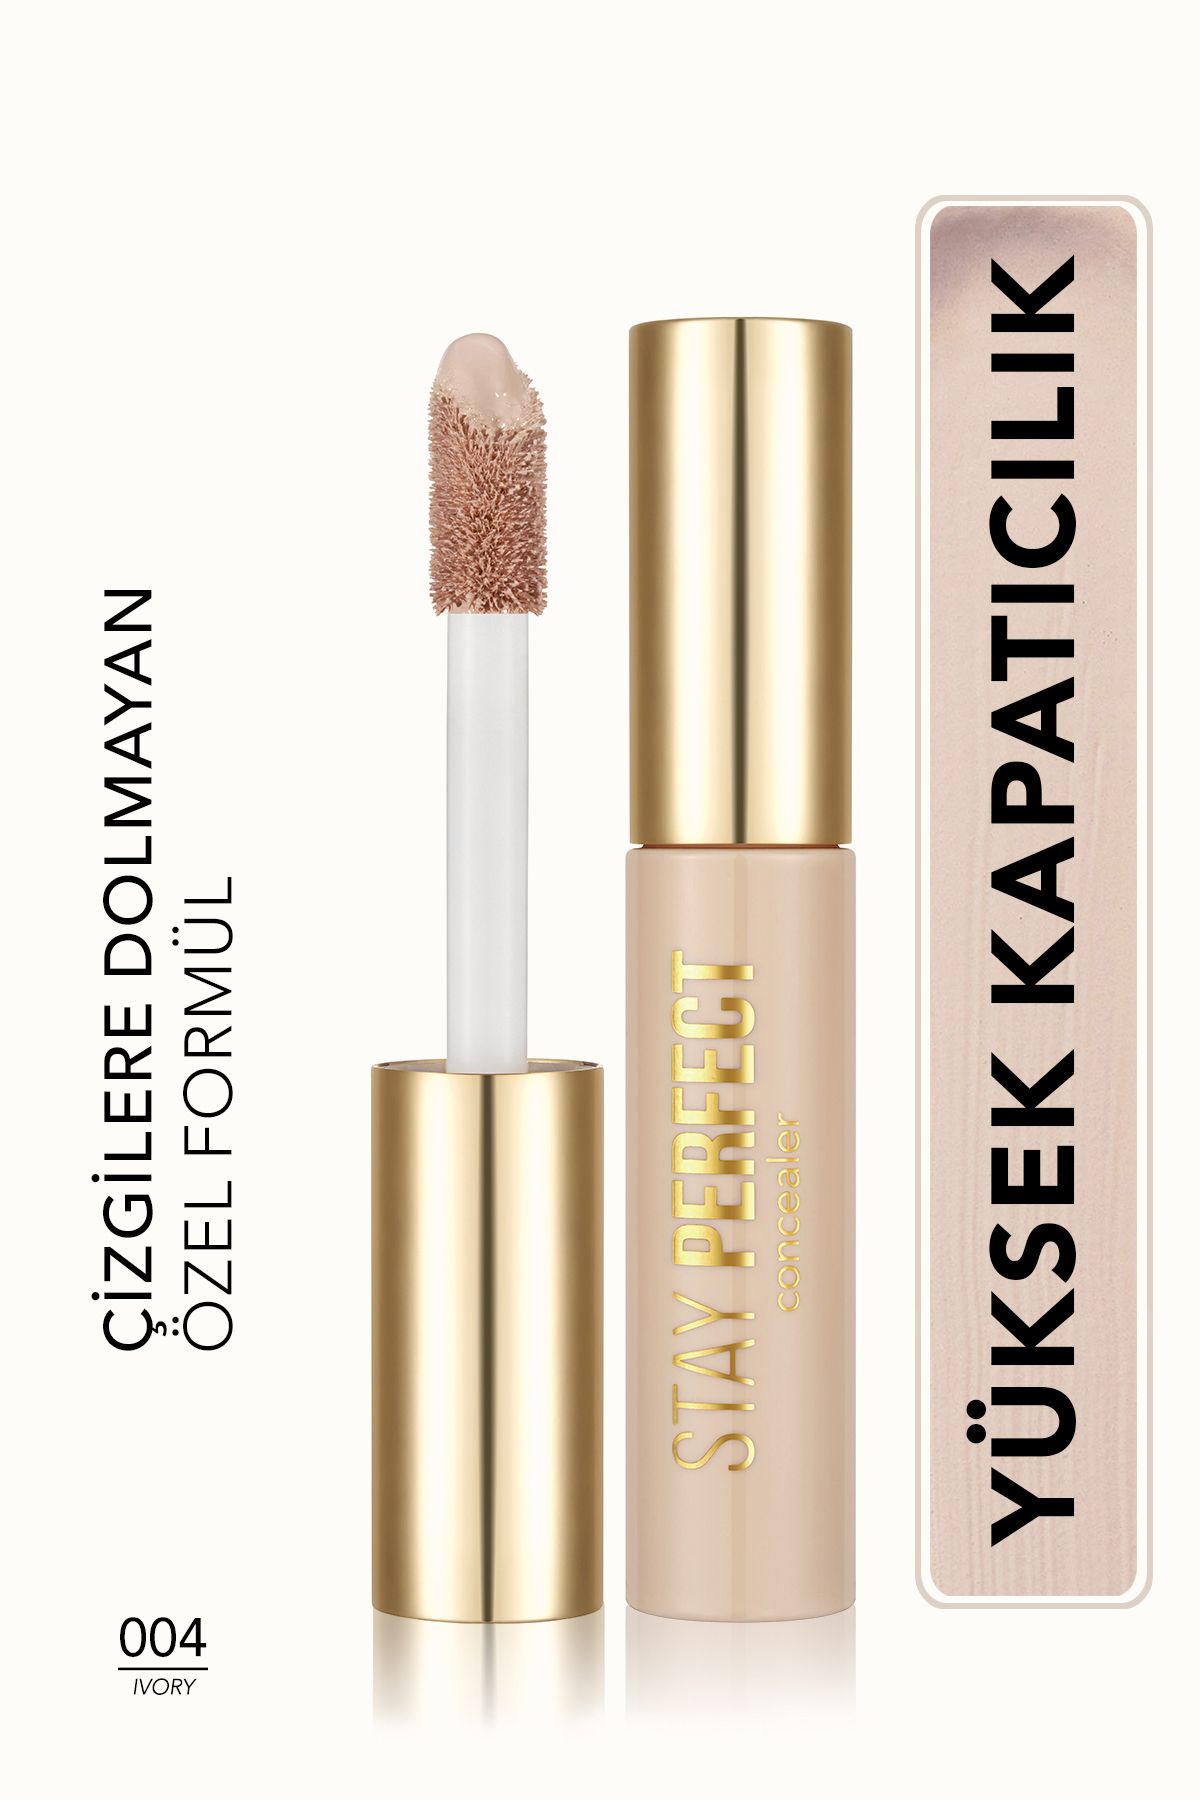 Flormar NATURAL FİNİSH CONCEALER (COOL UNDERTONE) - STAY PERFECT CONCEALER - 004 IVORY - DEMBA2164